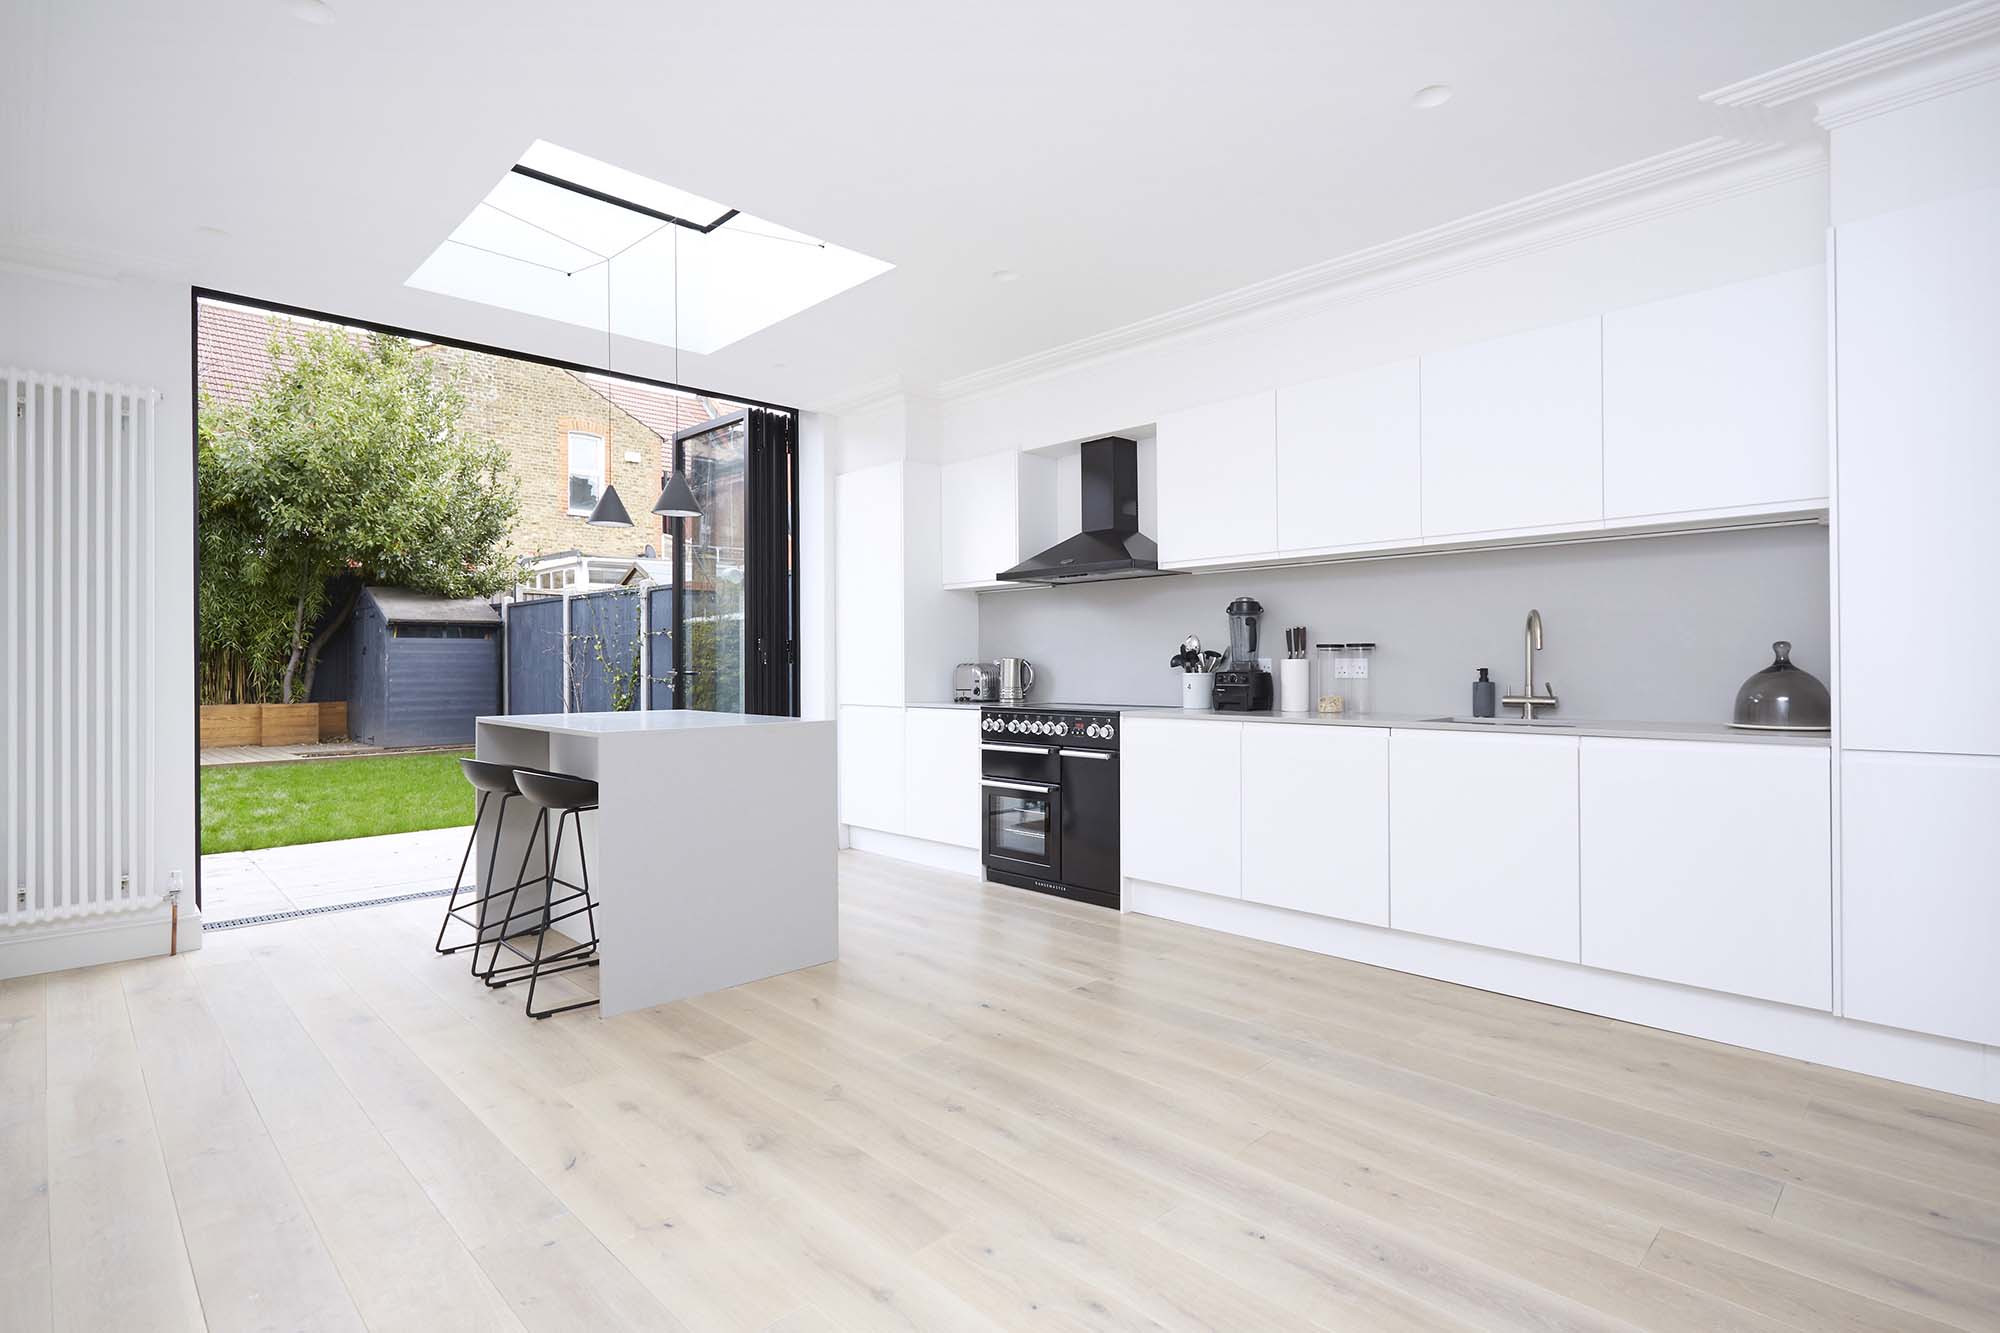 </p> <p>Find your ideal home design pro on designfor-me.com - get matched and see who's interested in your home project. Click image to see more inspiration from our design pros</p> <p>Design by Ayca, Interior designer from Wandsworth, London</p> <p> #interiordesign #interiors #homedecor #homeinspiration #extensions #extensiondesign #extensioninspiration #extensionideas #houseextension #minimalistarchitecture #minimalistdecor #minimalistdesign #miminalism </p> <p>